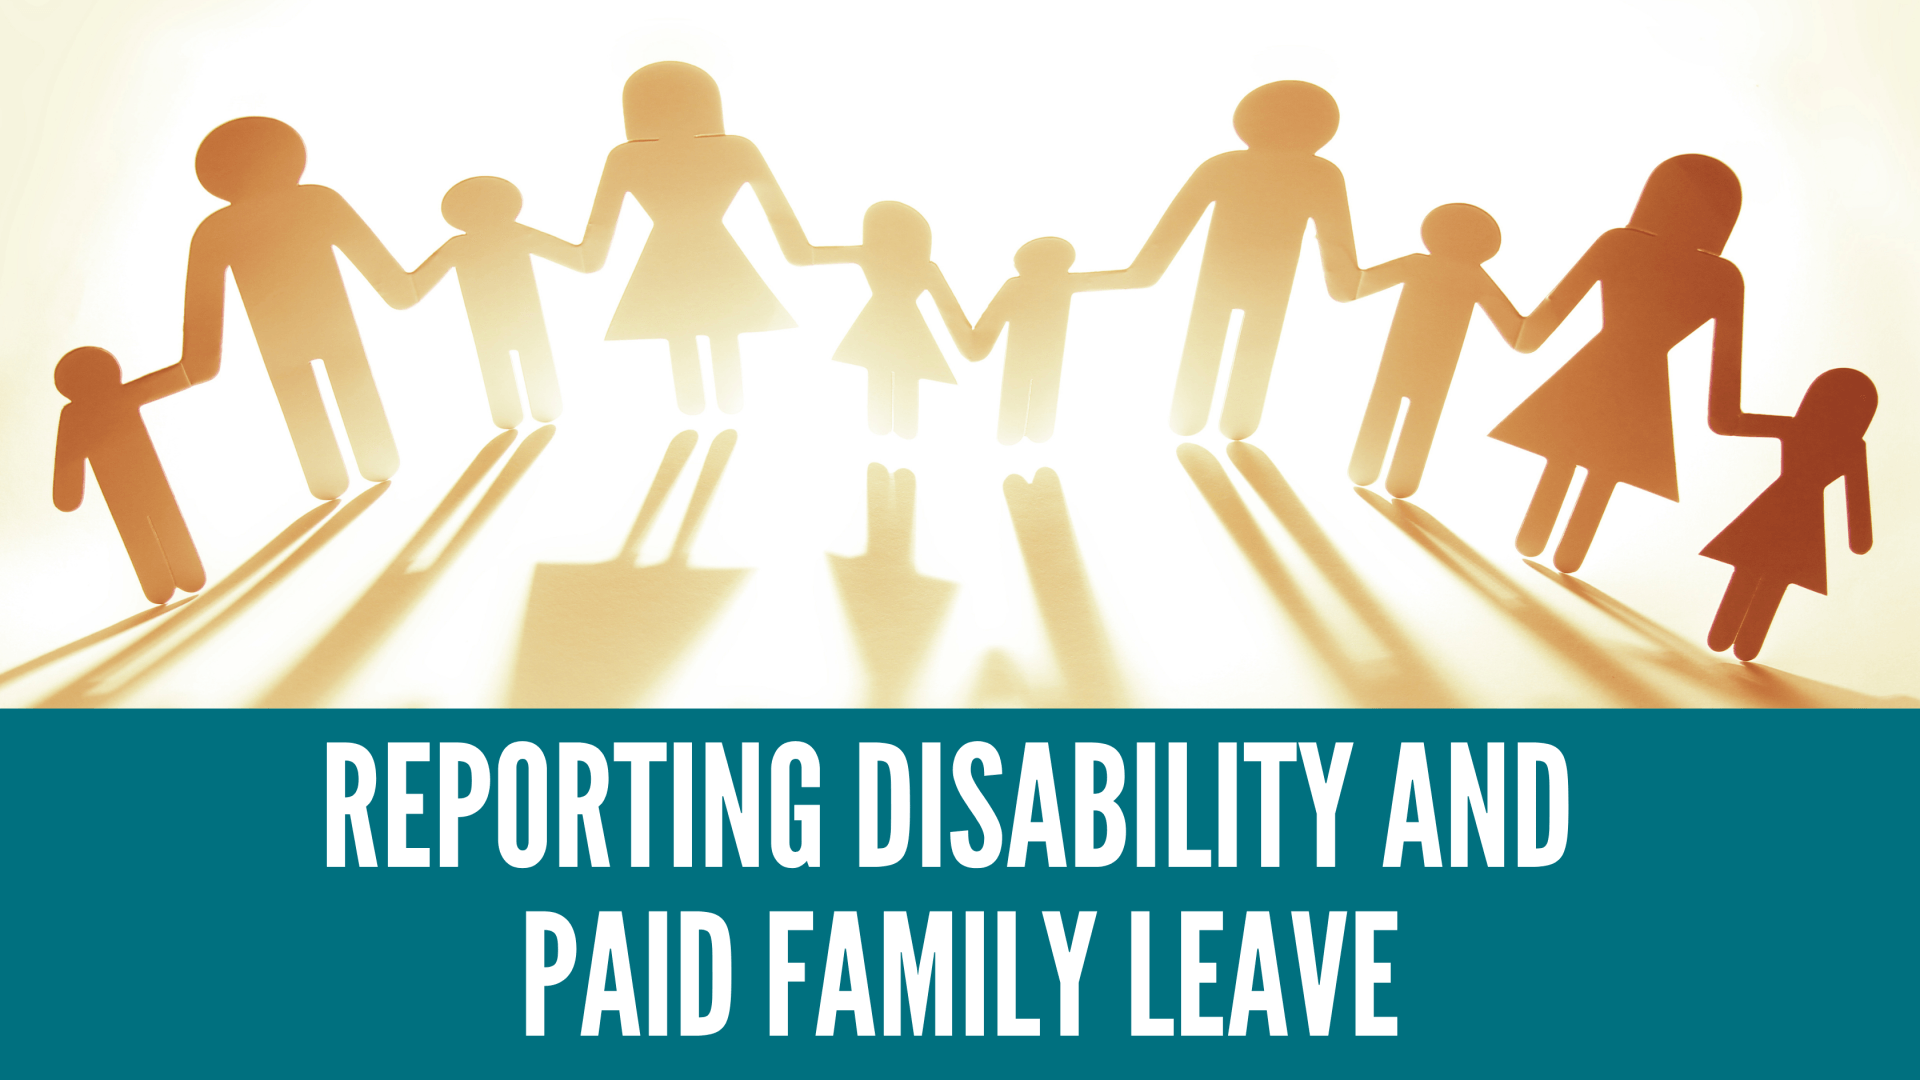 Reporting Disability and Paid Family Leave